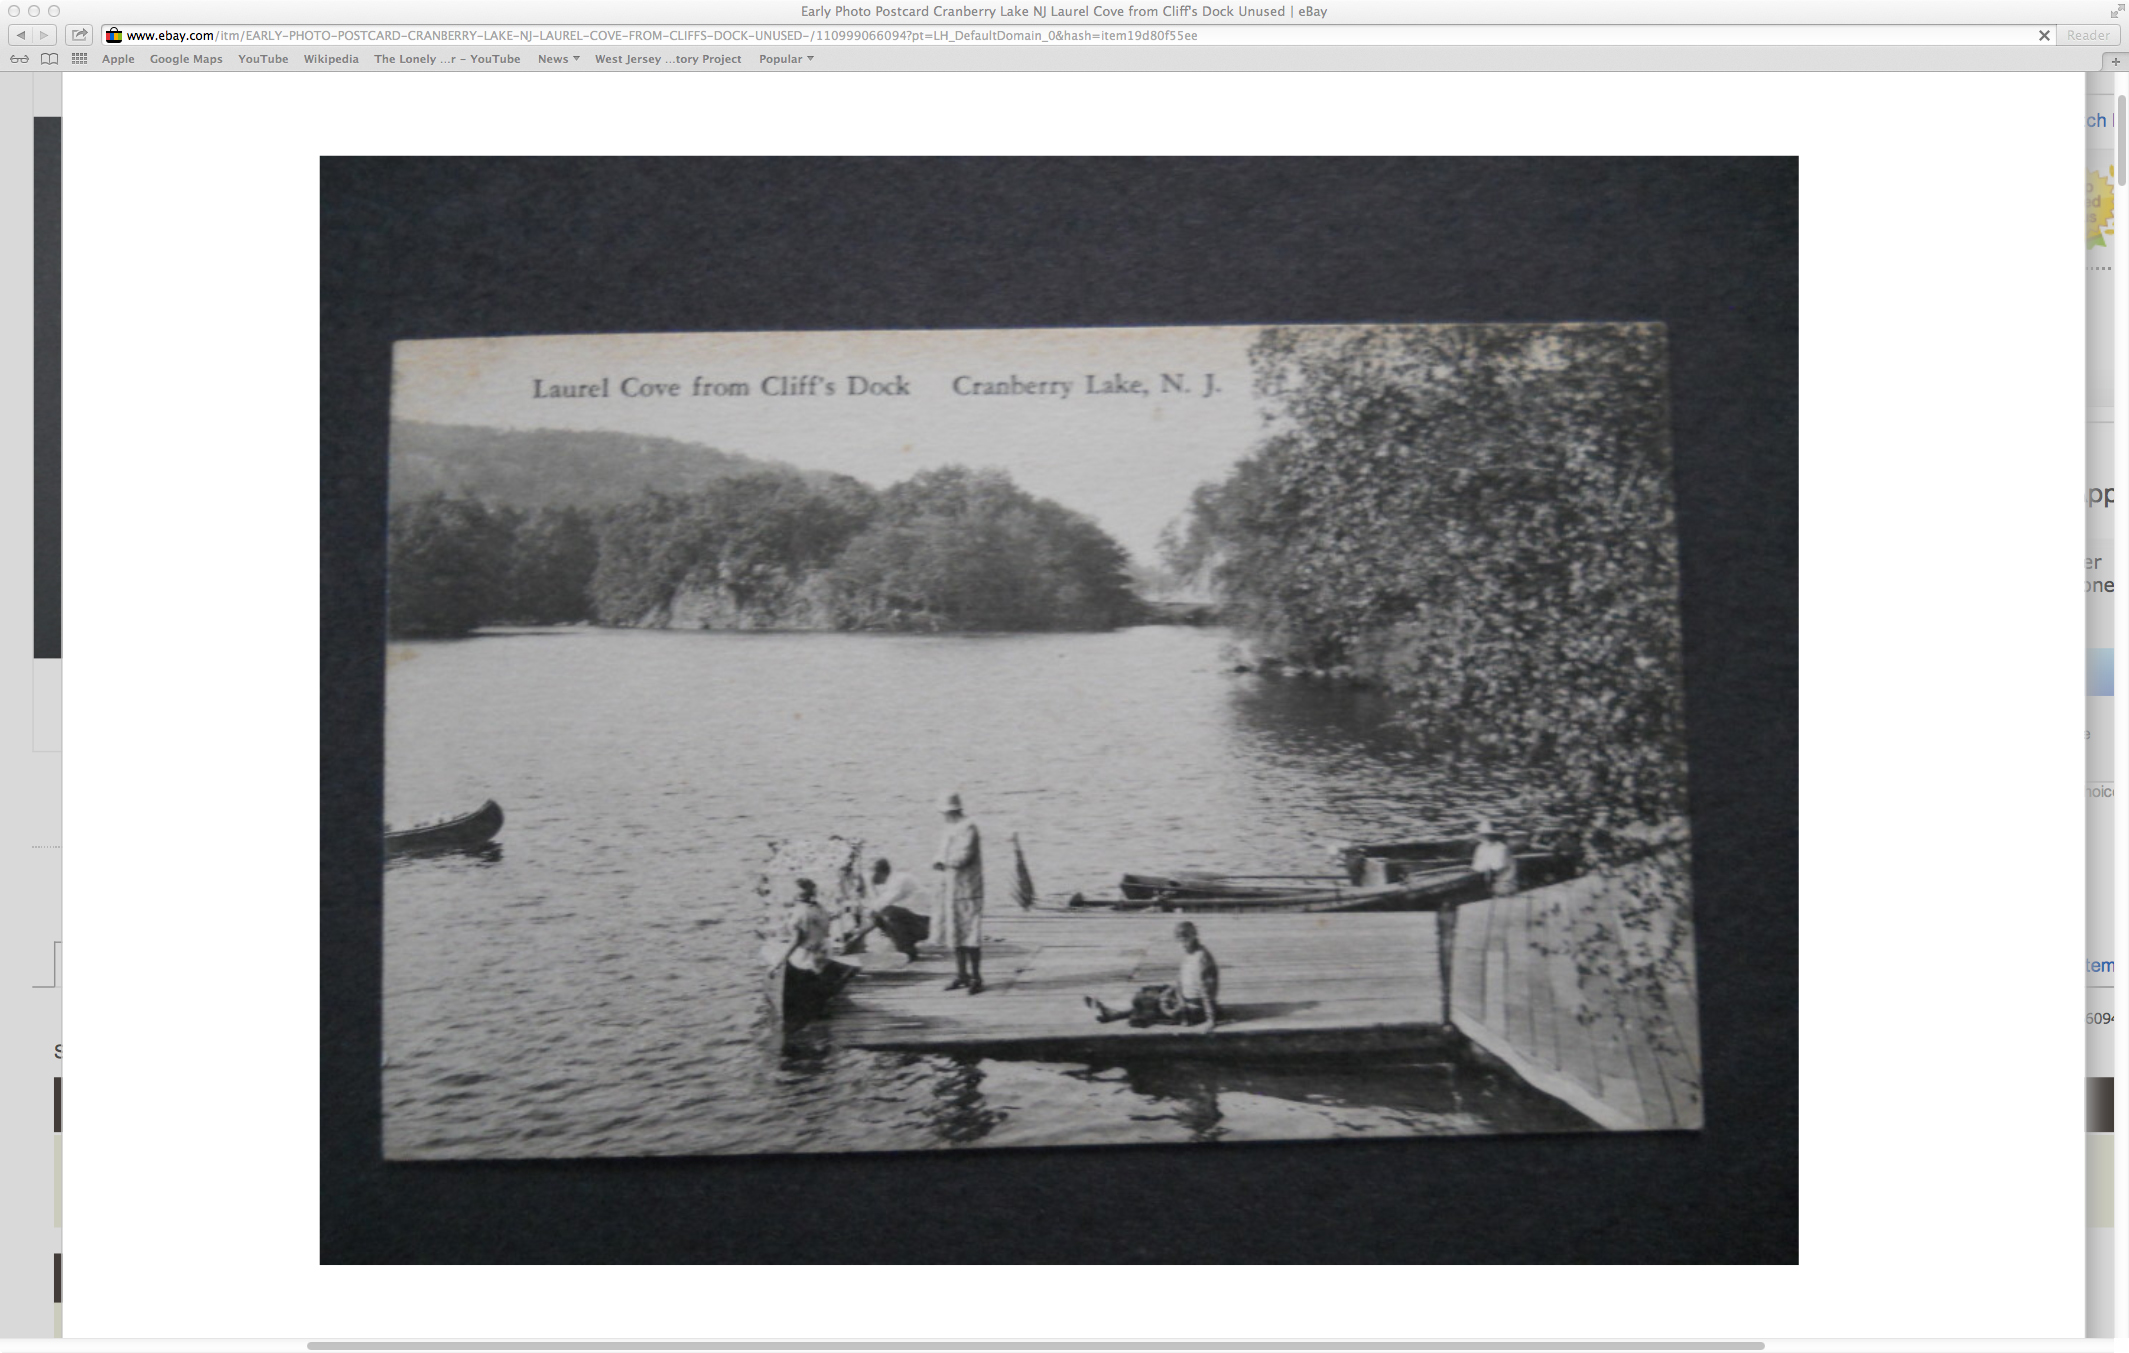 Cranberry Lake - Laurel Cove from Cliffs Dock - c 1910